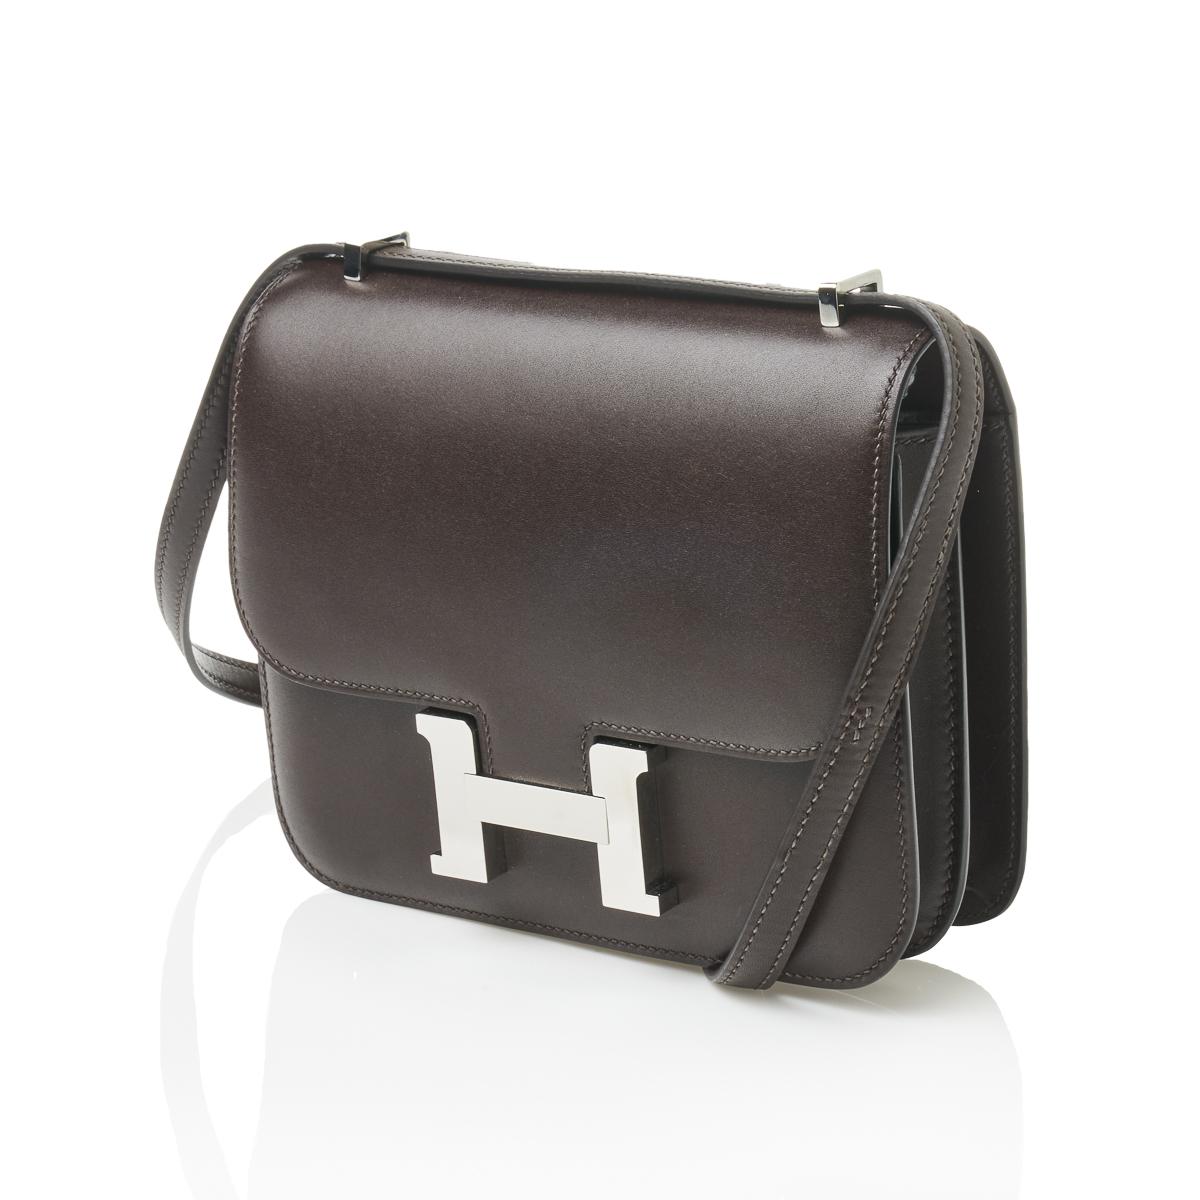 All about the Hermès Constance bag collection